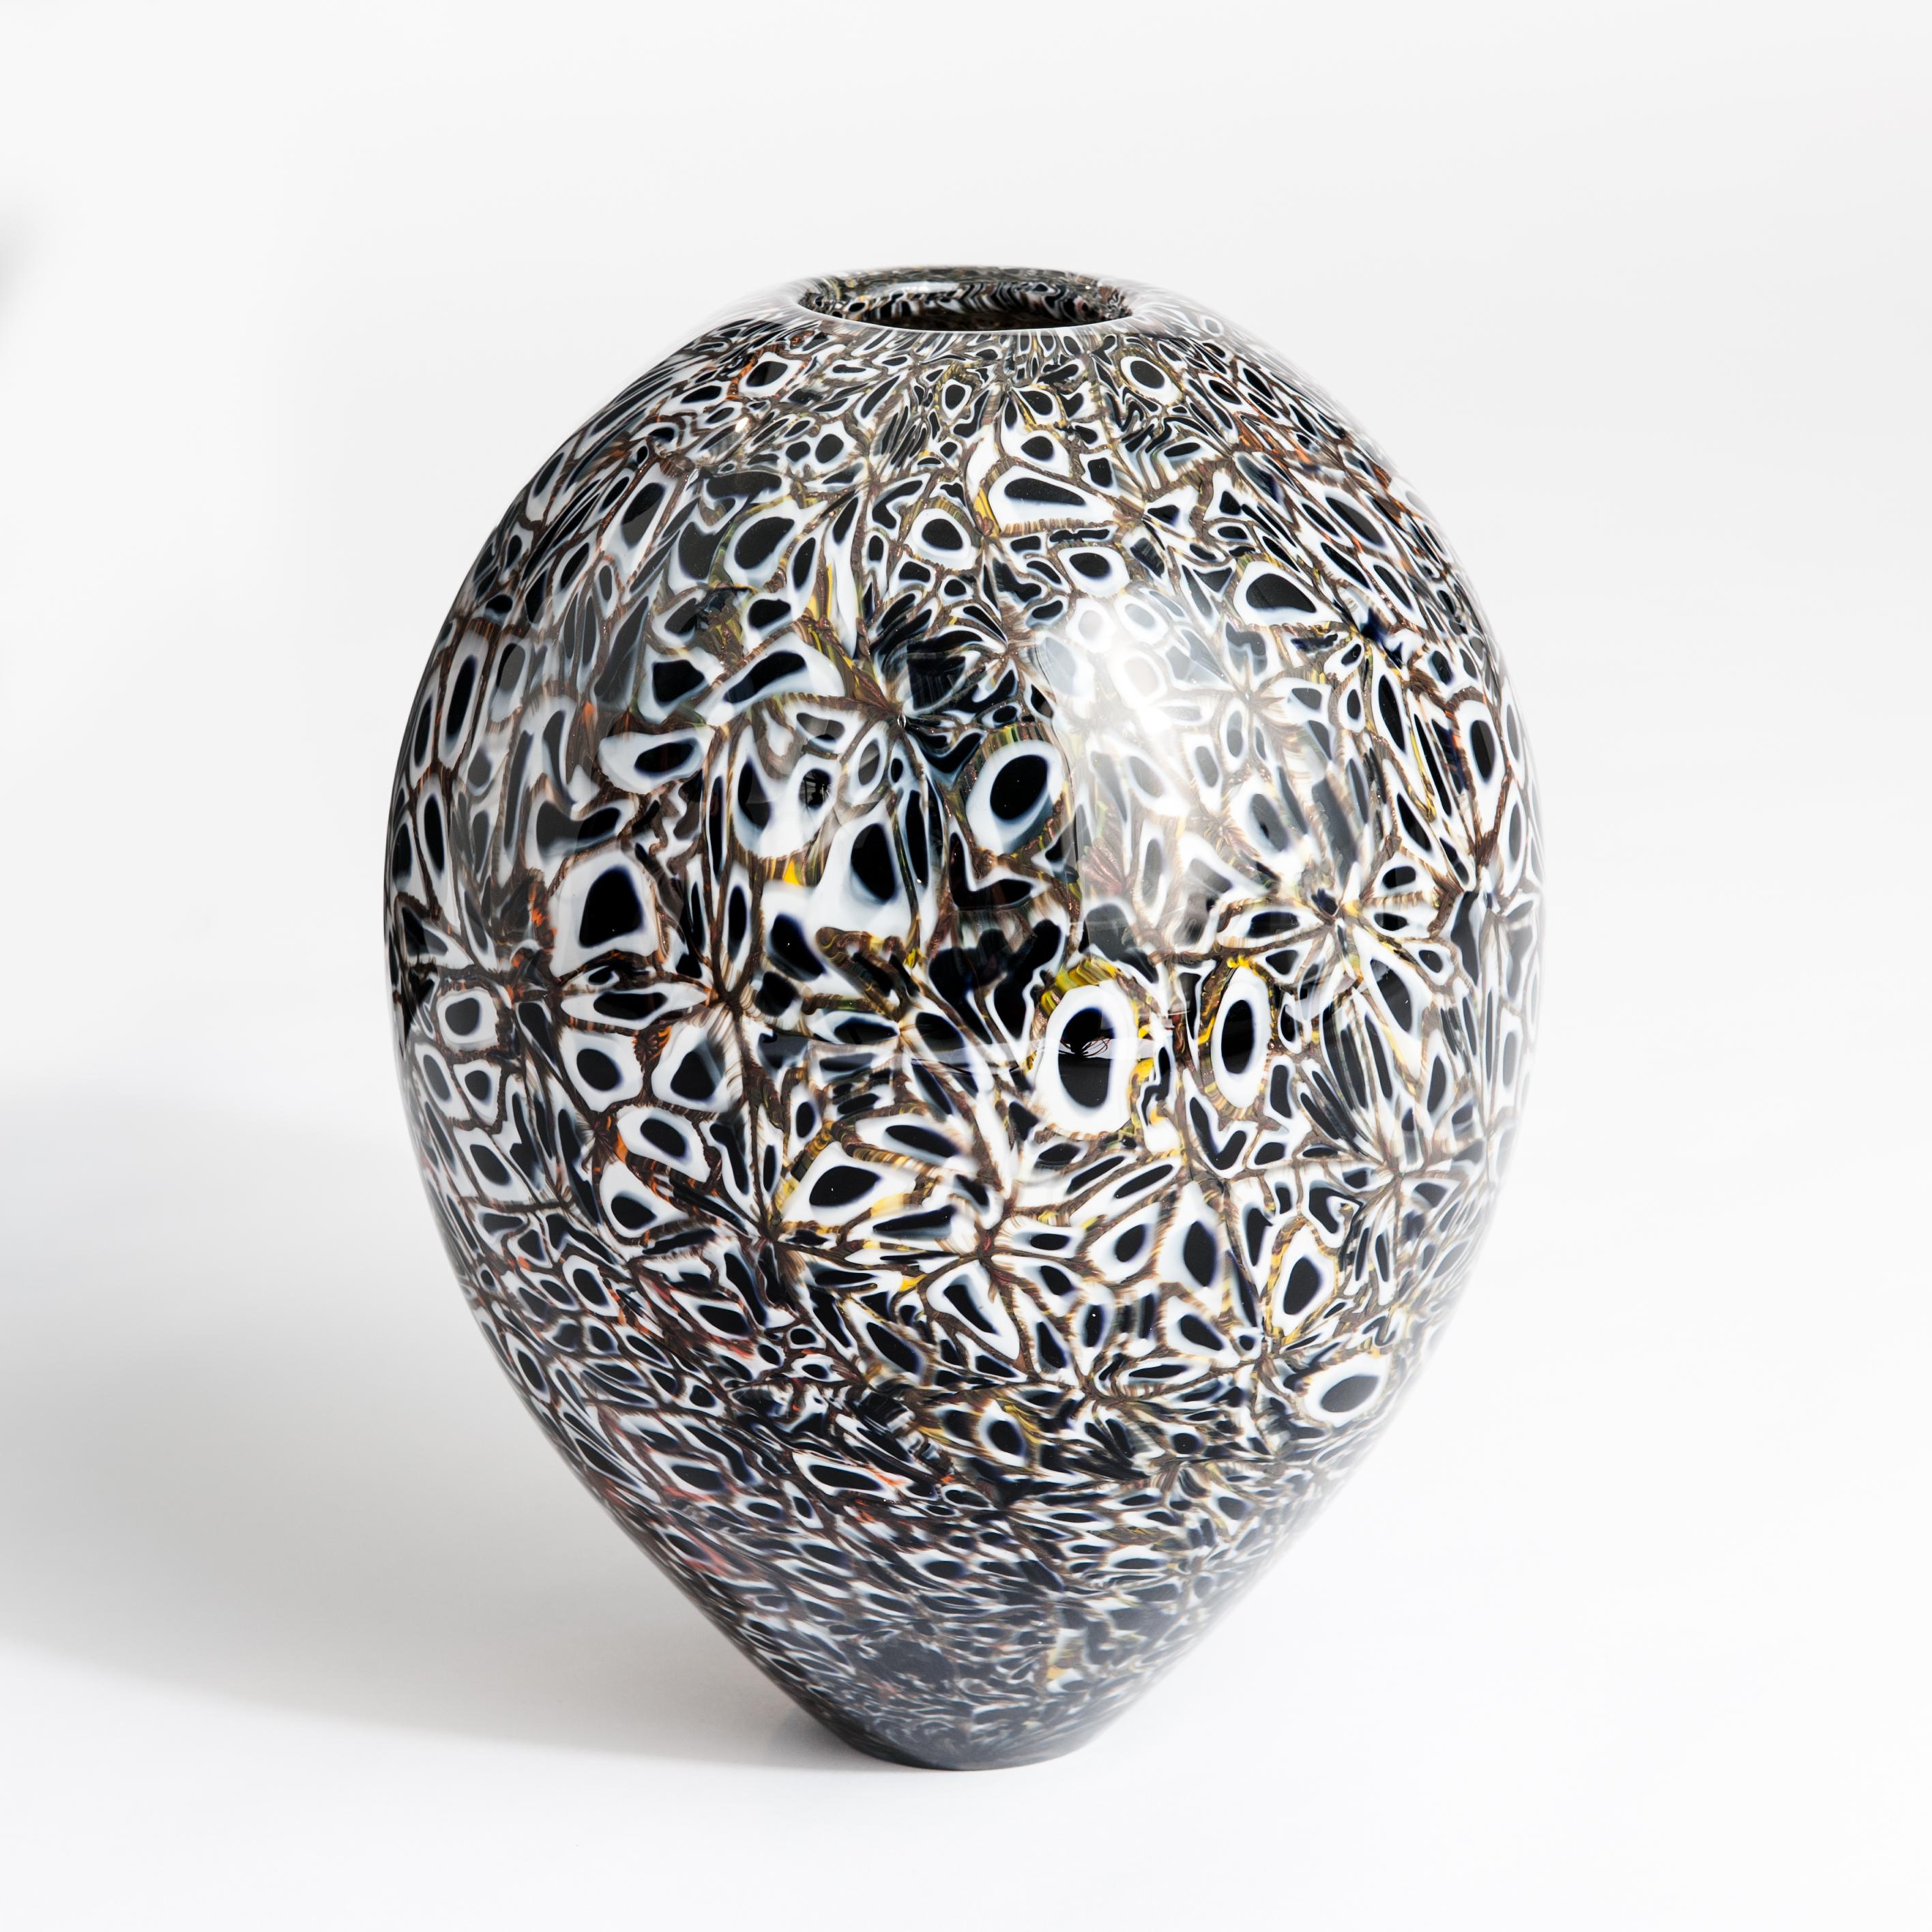 Modern Italian Murrine Murano glass vase in black-white-brown-copper by Paolo Crepax


Biography Paolo Crepax 

Murano Venezia 1960 Paolo at the tender age of 10 he started working with glass master Livio Seguso. From 1966 to 1973 he works in the